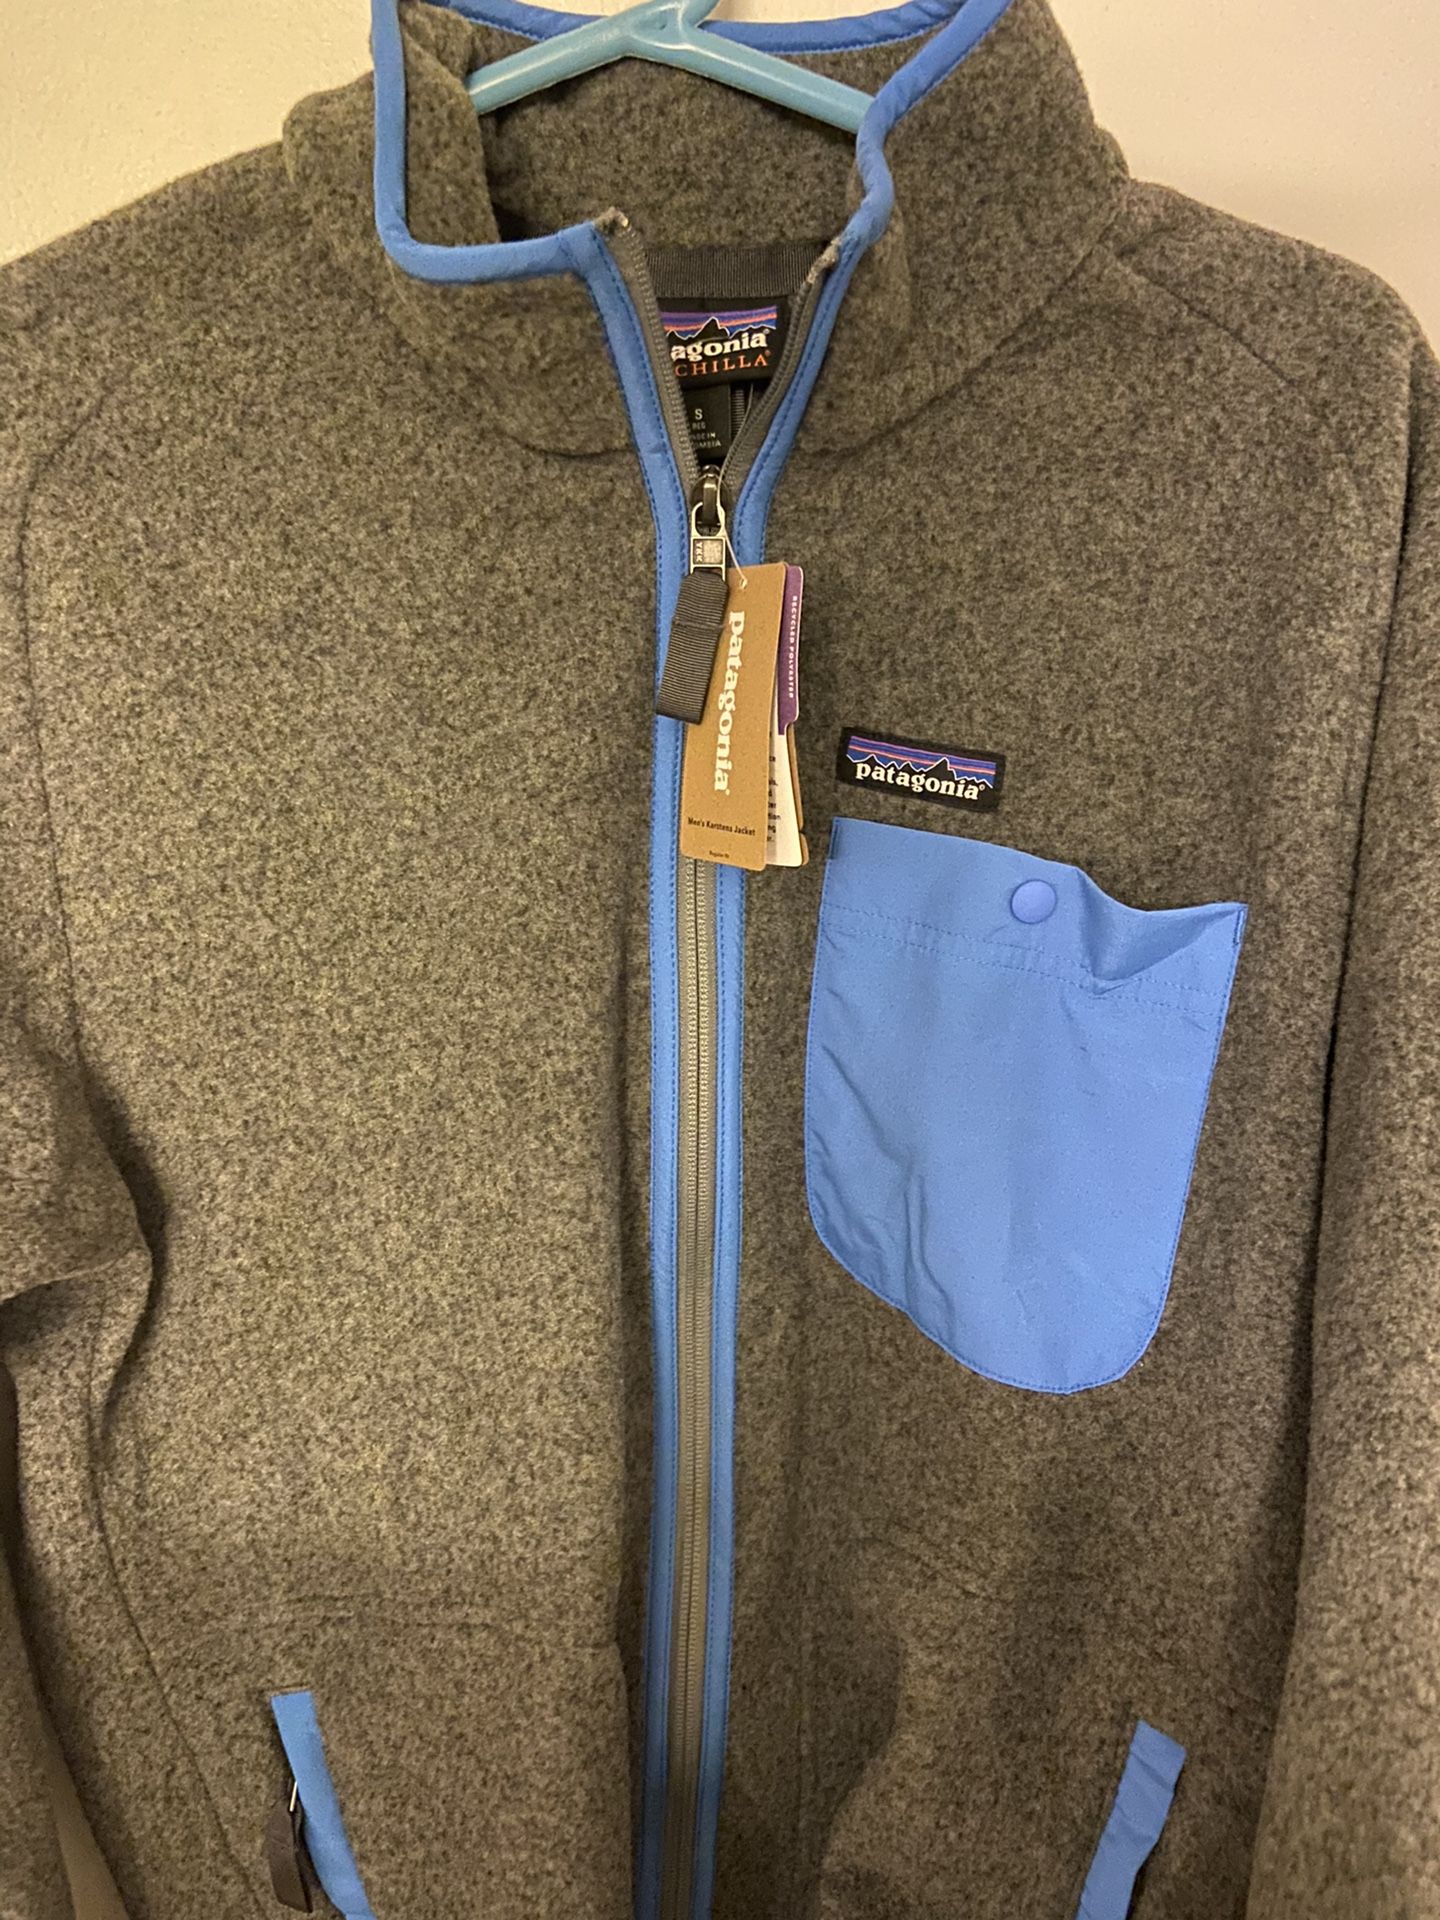 Patagonia Karstens synchilla brand new sz small with tags